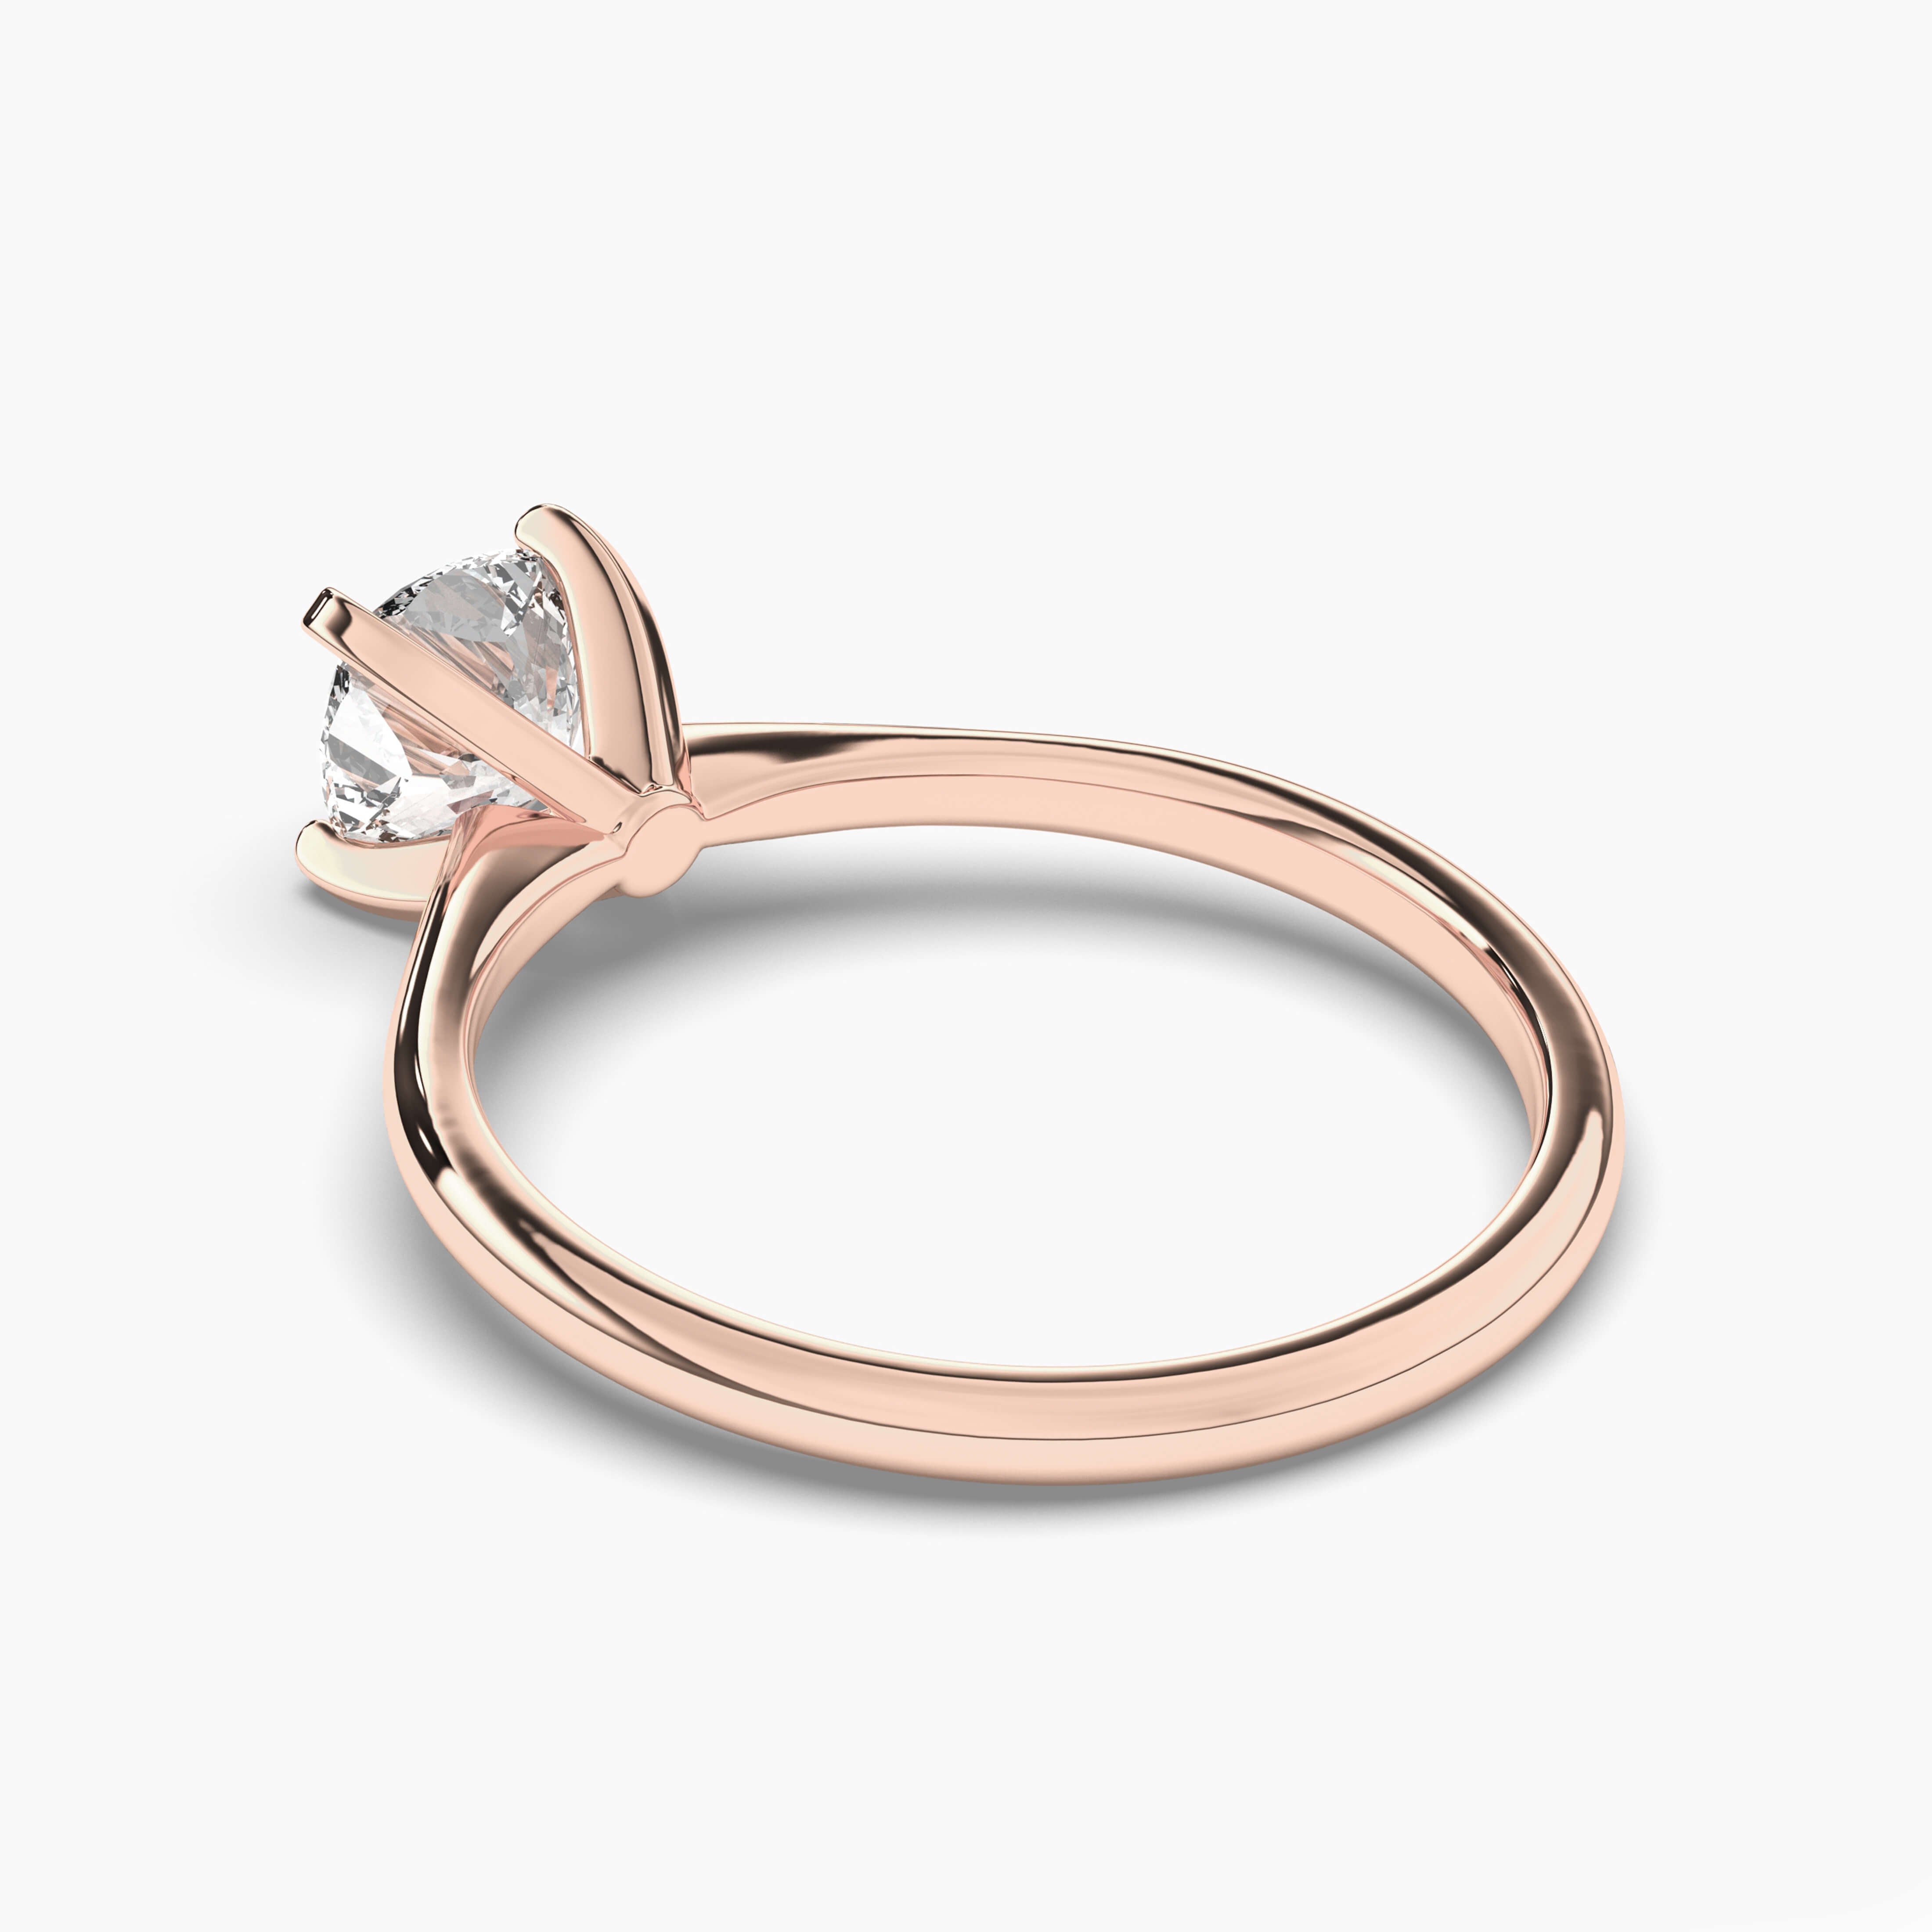  Cushion Solitaire Diamond Engagement Ring in Rose Gold